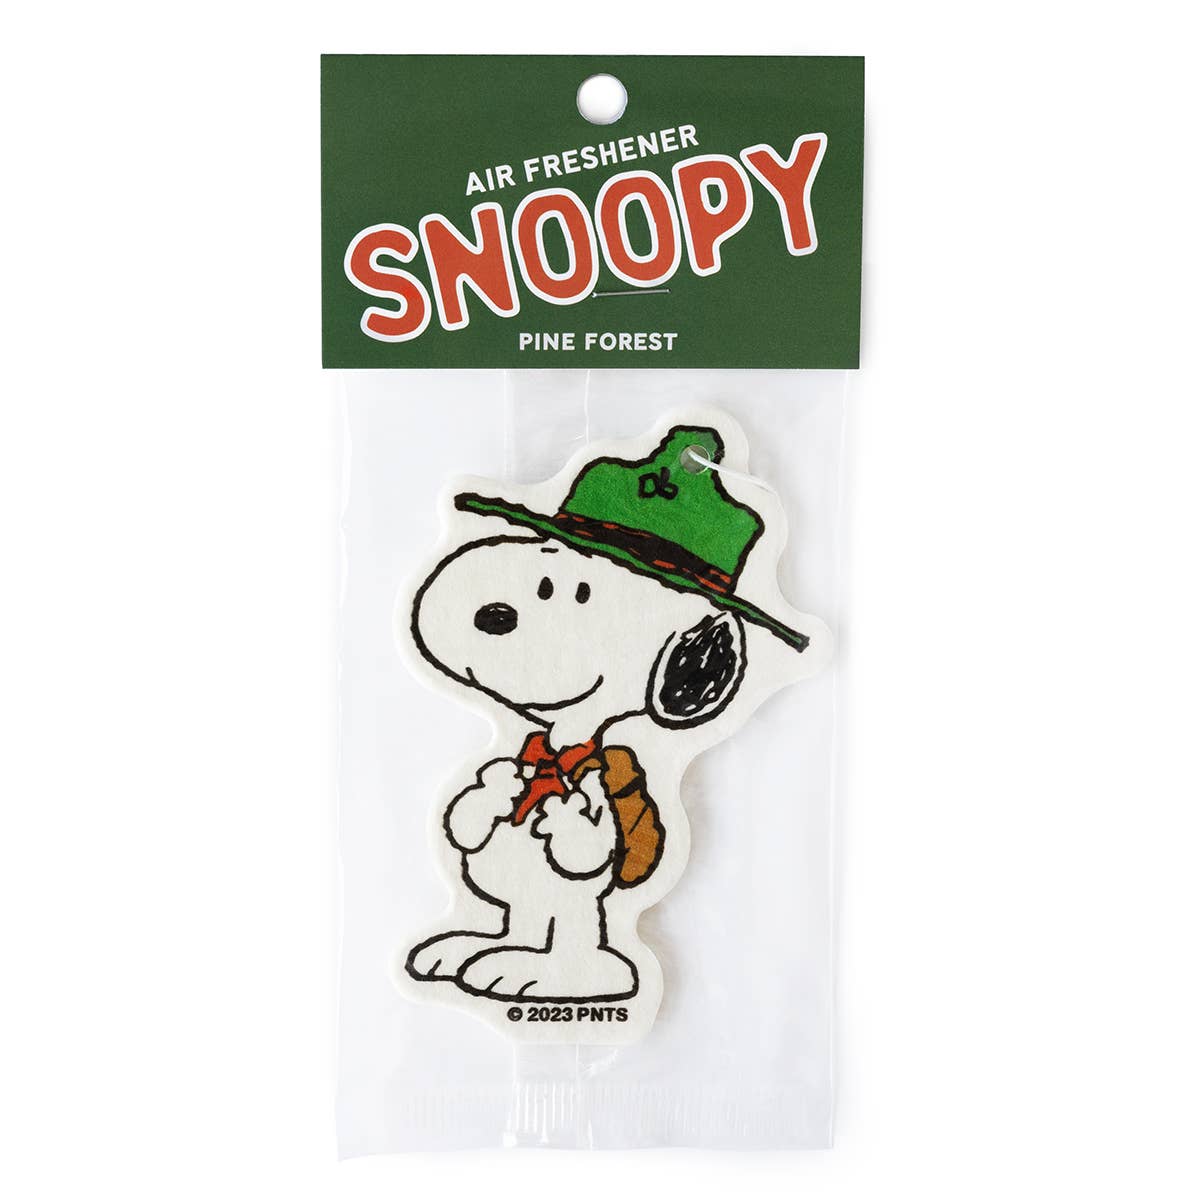 Three Potato Four collaborates with Peanuts® to release a Snoopy Scout Air Freshener